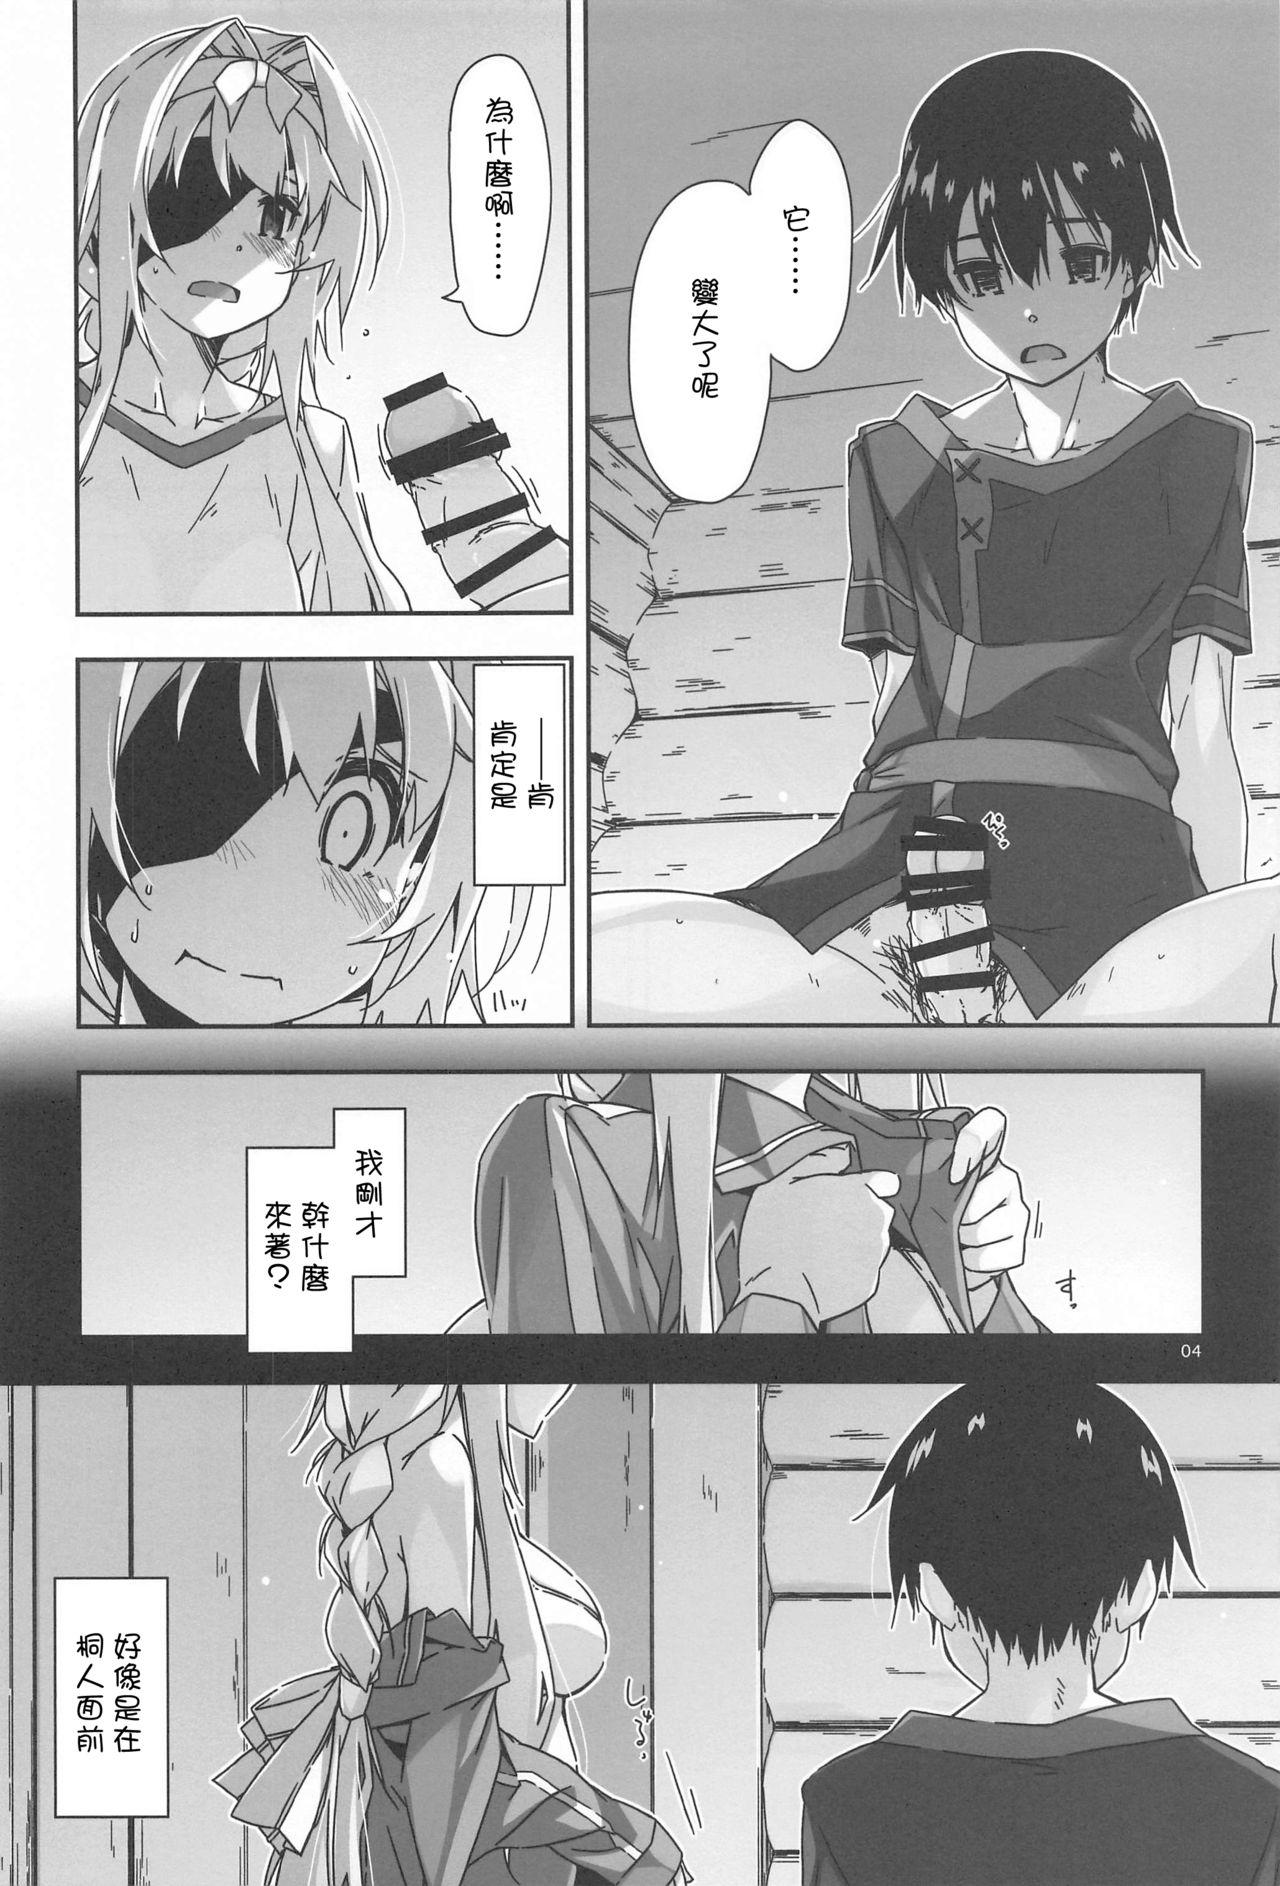 Fodendo Alice no Naisho - Sword art online Step Brother - Page 4